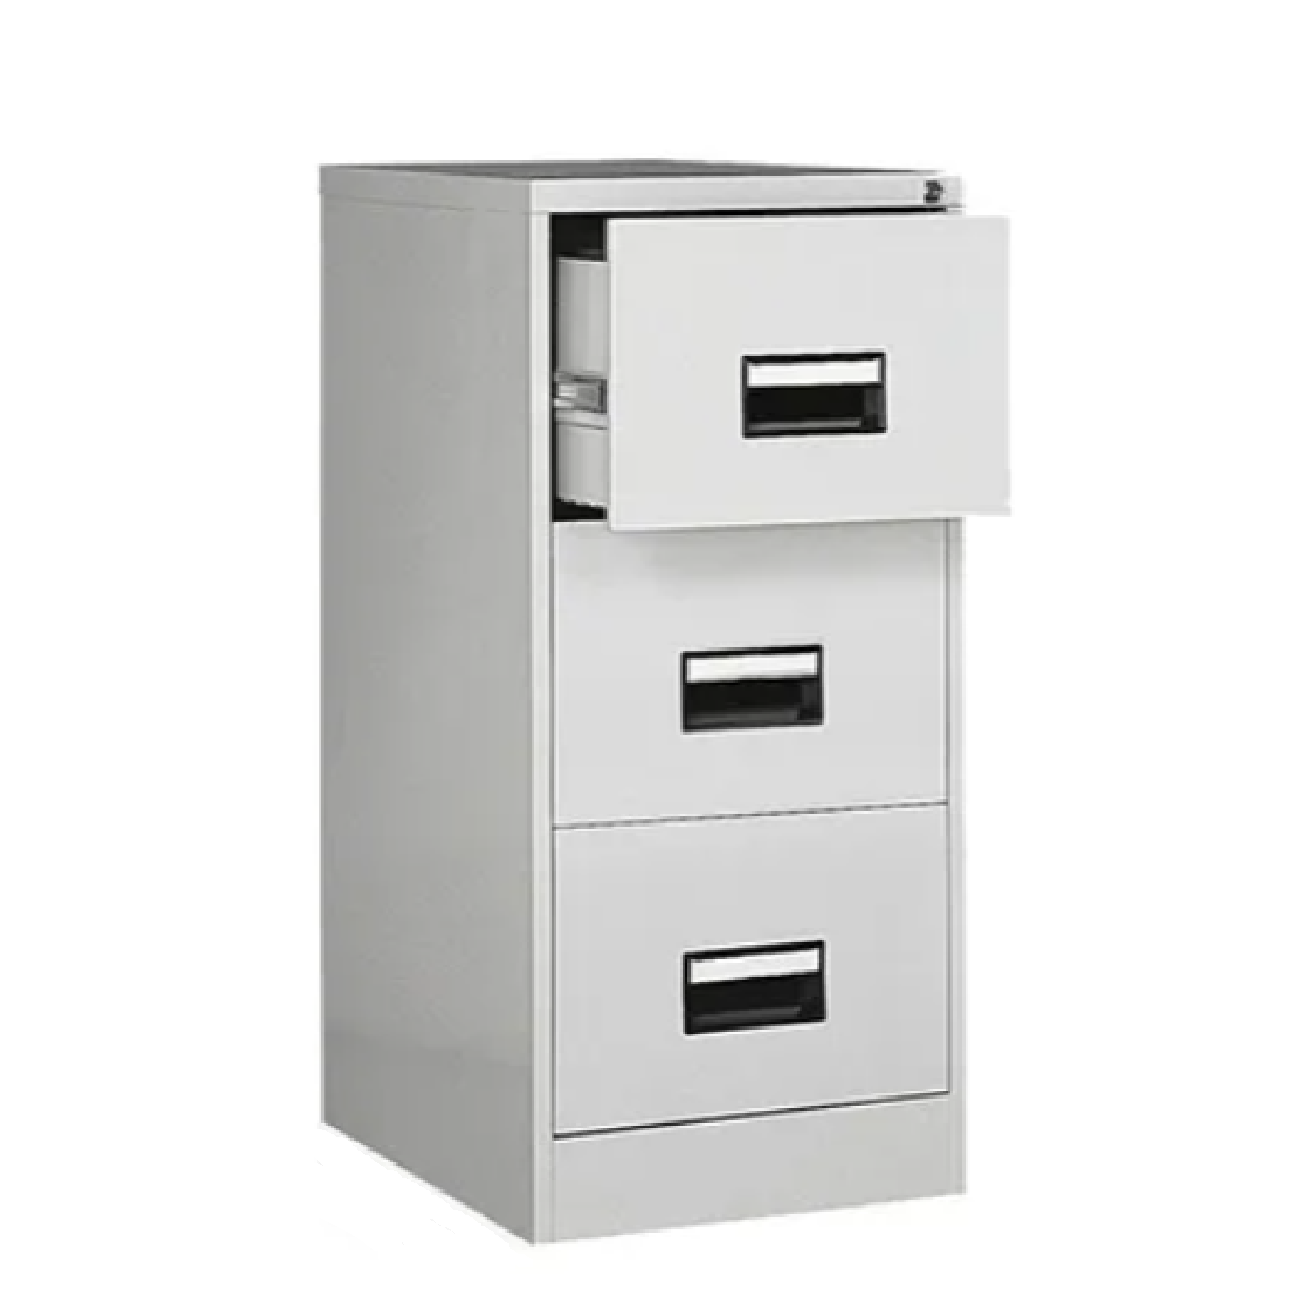 SY403, 3 DRAWER Filing Cabinet